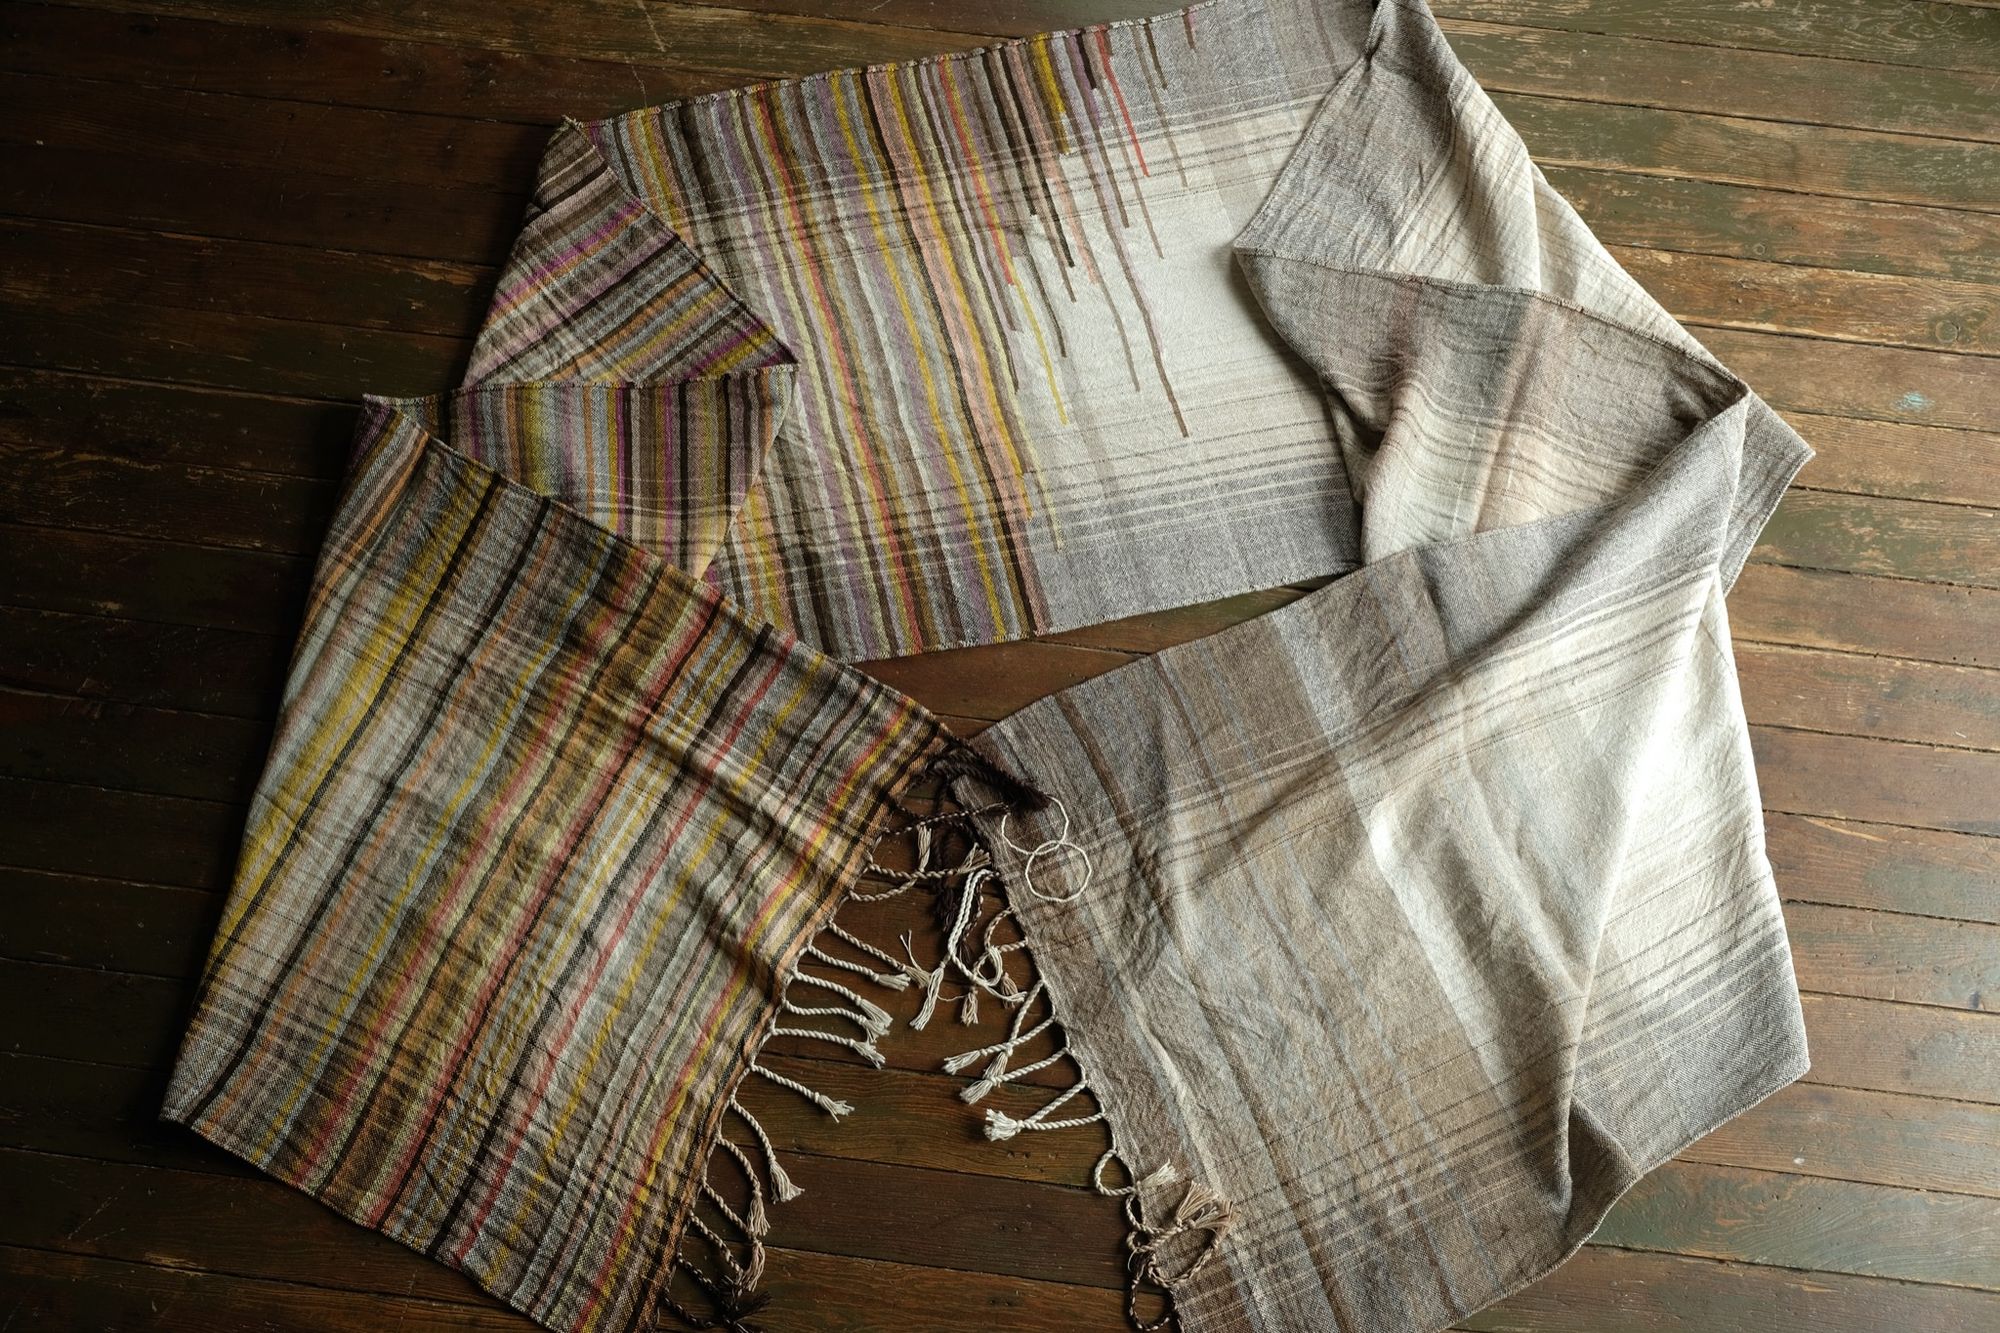 handwoven raw silk fabric with softly colored lines woven into it in browns, red, yellow, pink